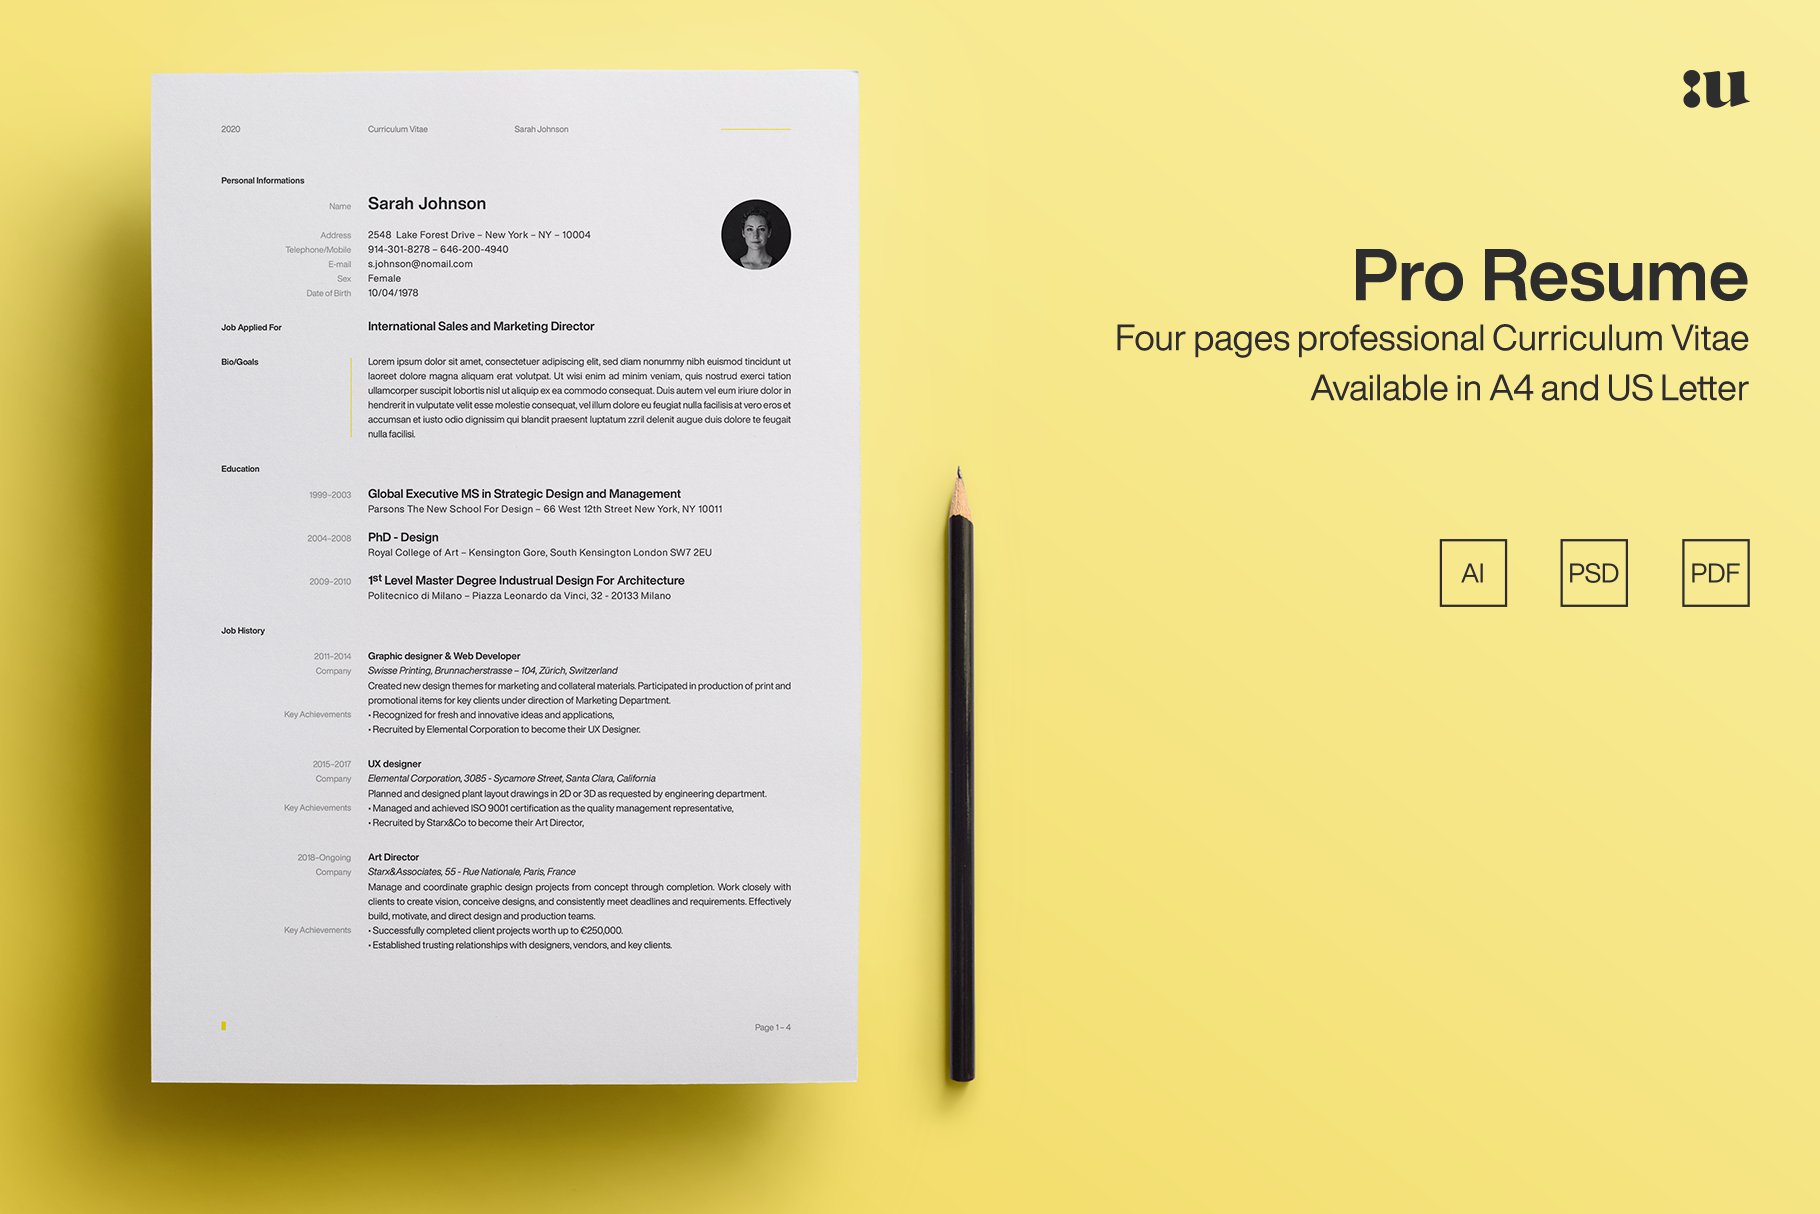 Pro Resume Template cover image.